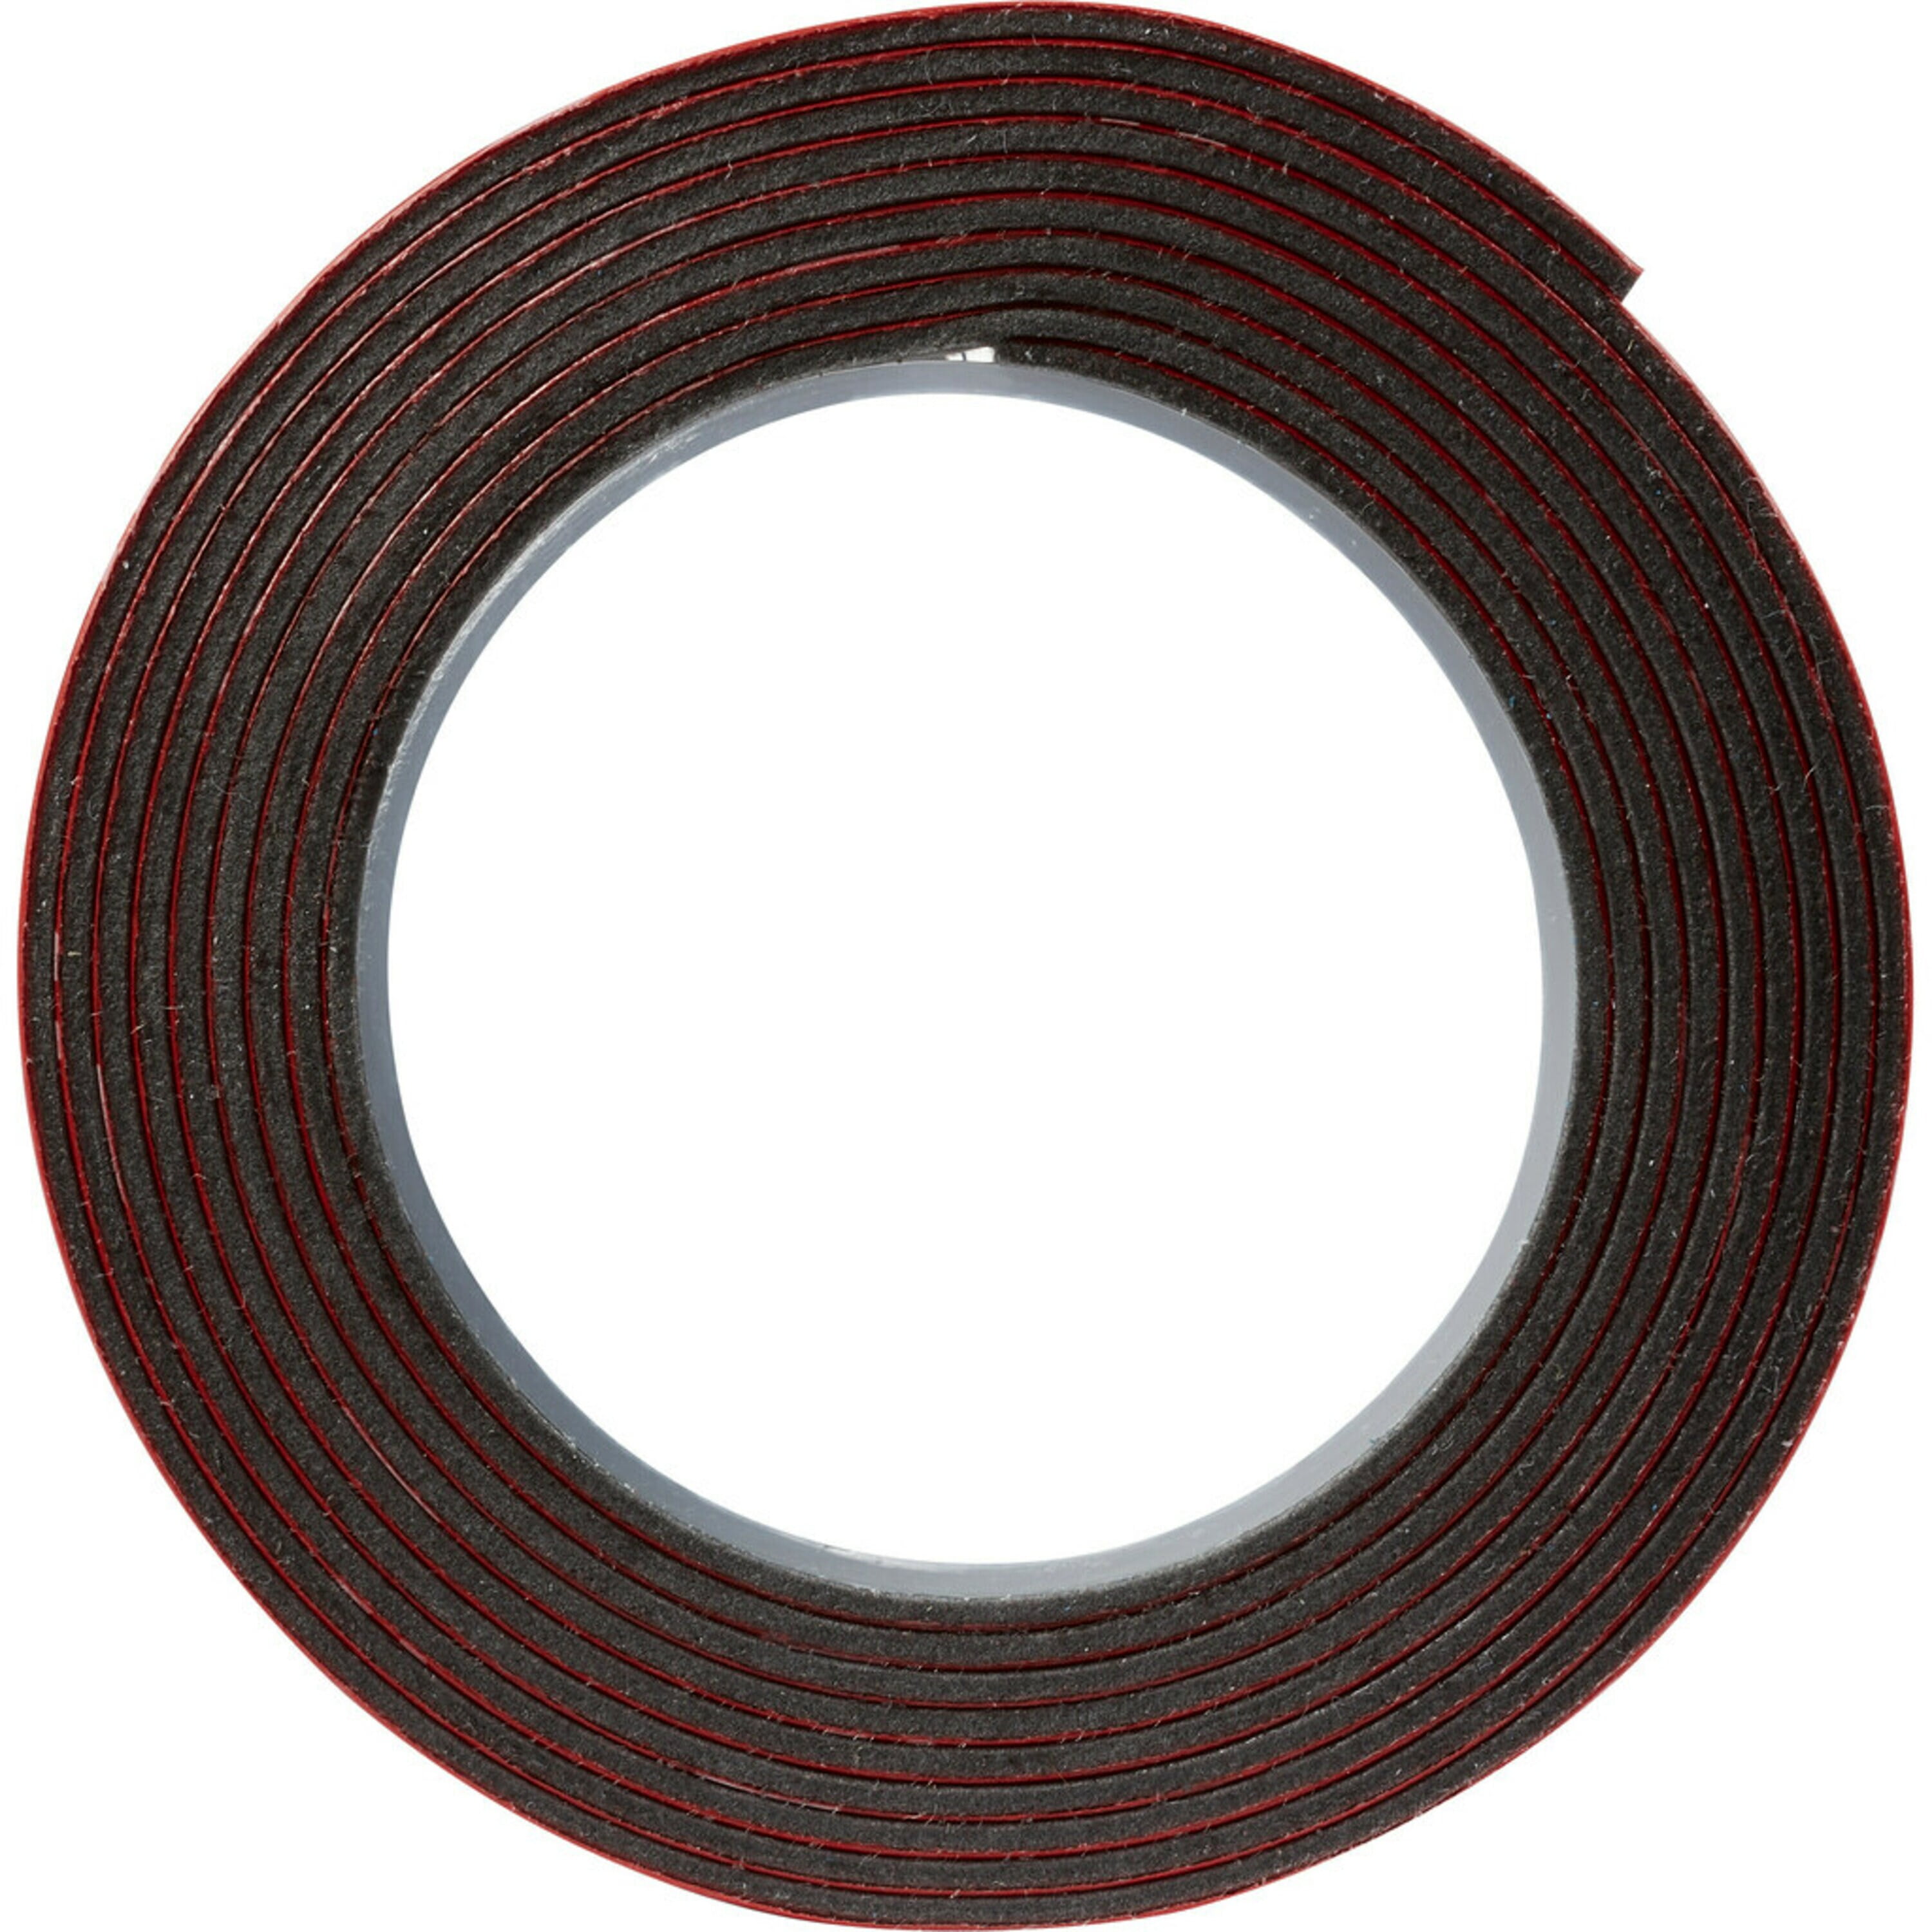 3M 03616 Super Strength Molding Tape, 7/8 in x 15 ft